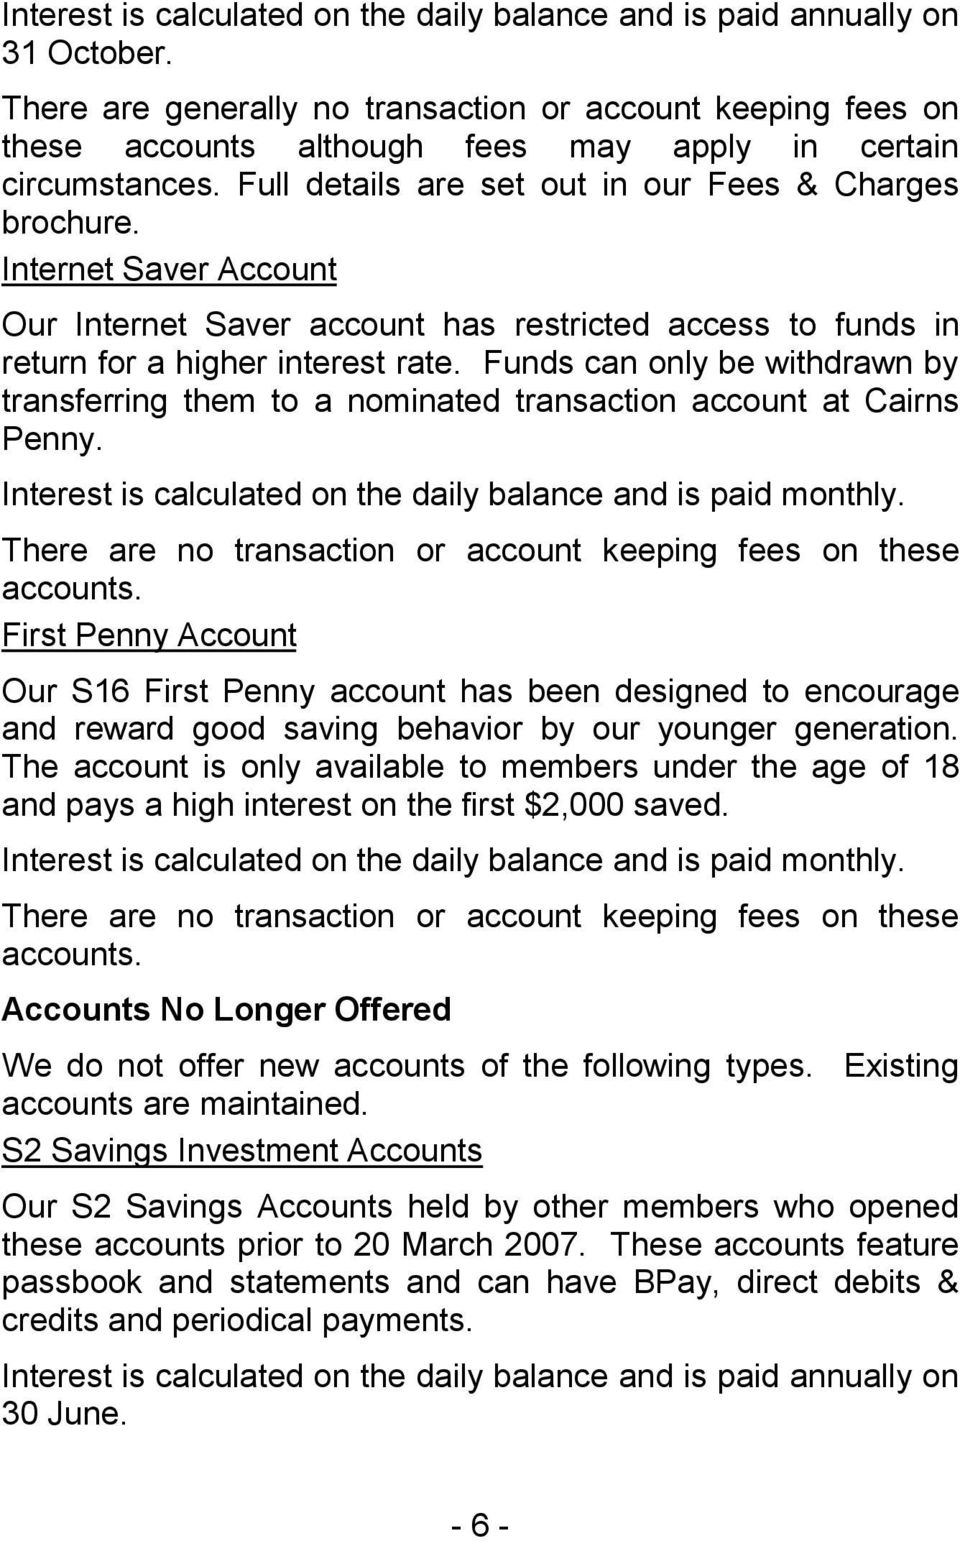 Internet Saver Account Our Internet Saver account has restricted access to funds in return for a higher interest rate.